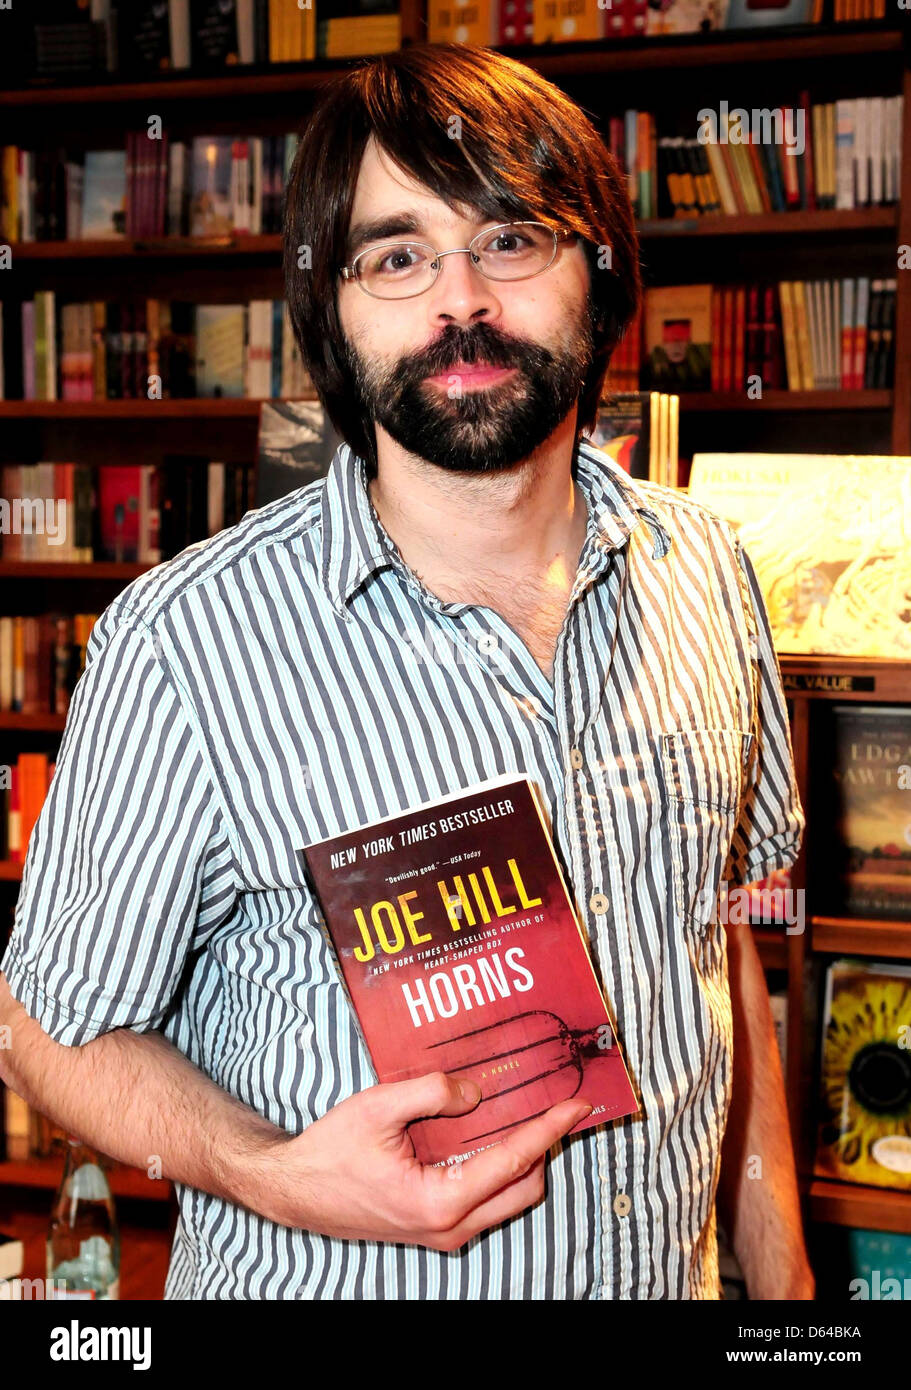 Author Joe Hill signs copies of his new book 'Horns' at Books & Books. Hill born Joseph Hillstrom King is the son of horror Stock Photo